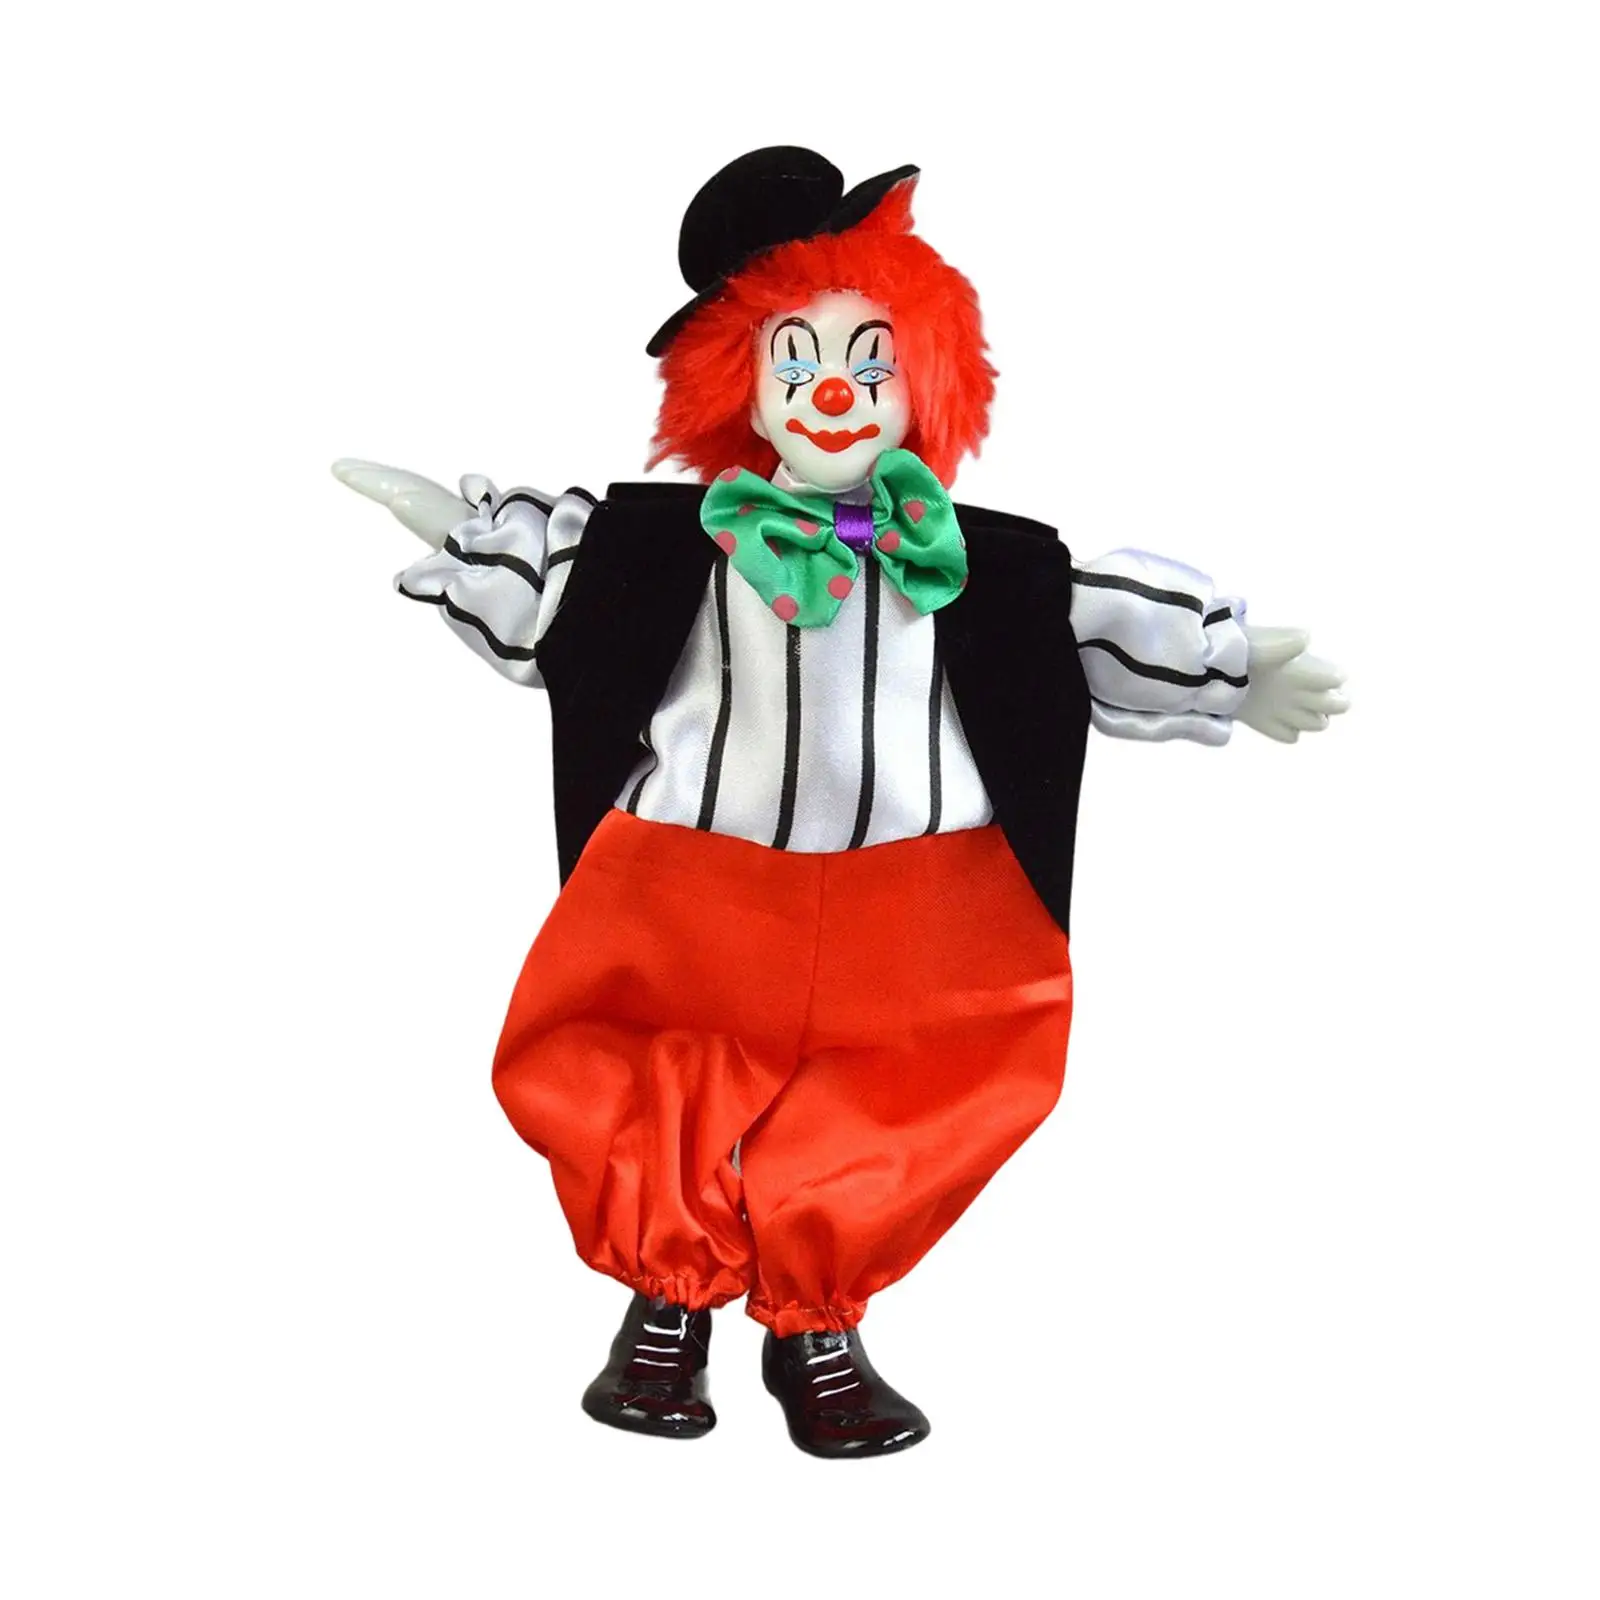 Clown Doll Ornament Arts Porcelain Clown Model for Collections Kids Toy